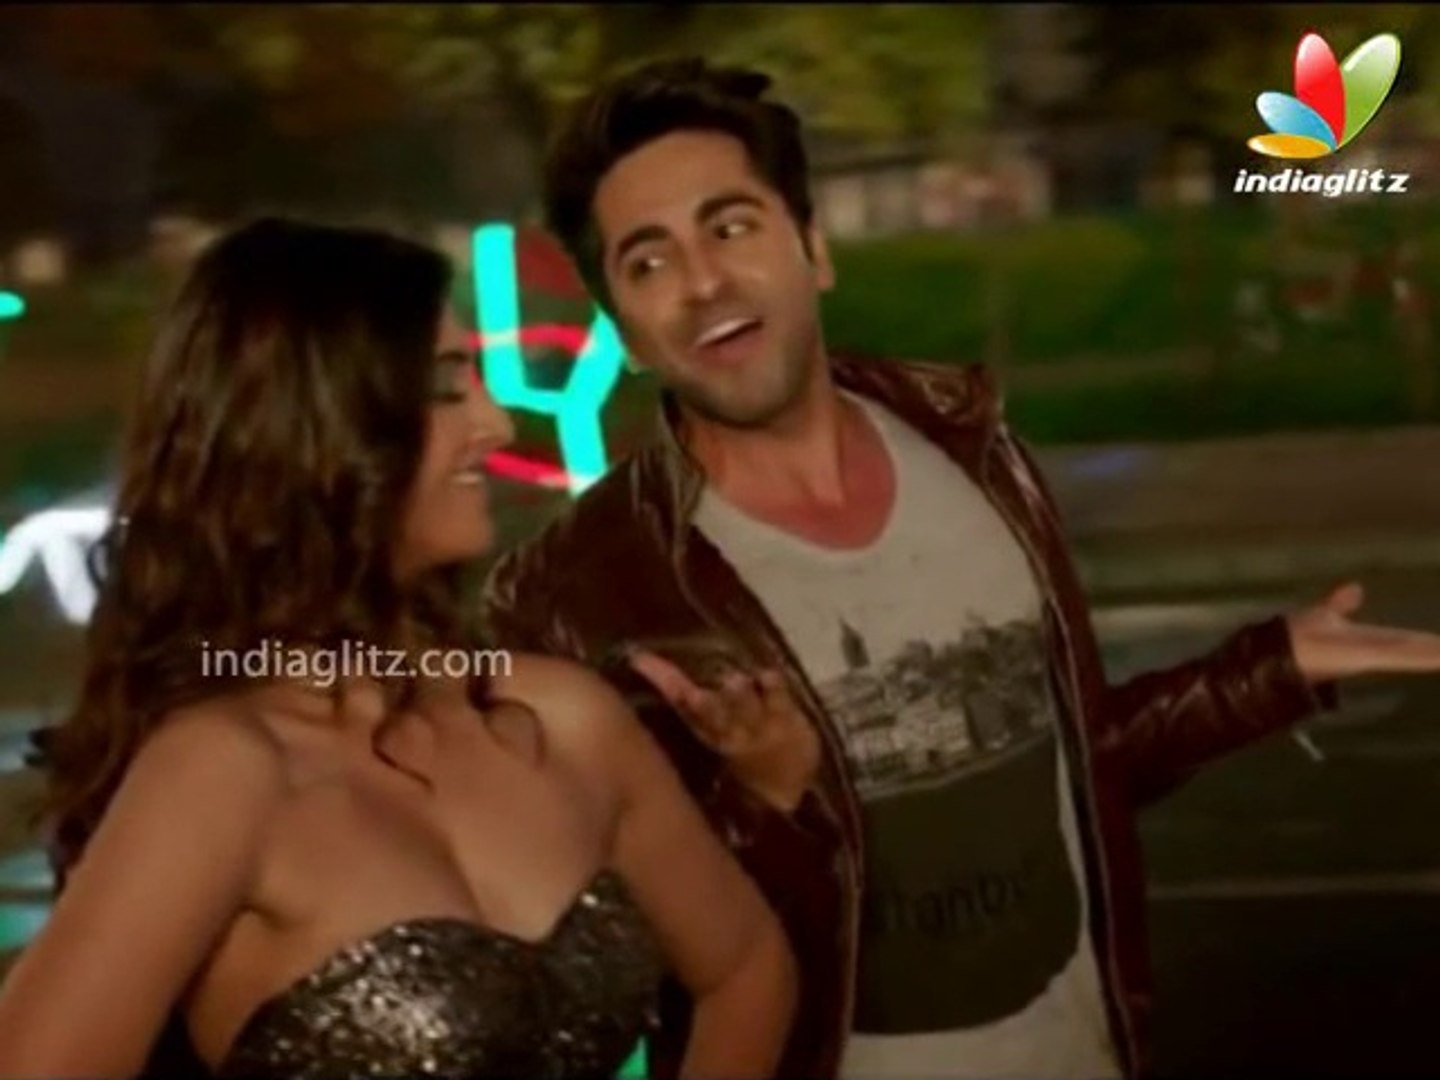 Checkout Sonam & Ayushmann's Hot Chemistry in 'Khamakhaan' Song:  Bewakoofiyaan - video Dailymotion